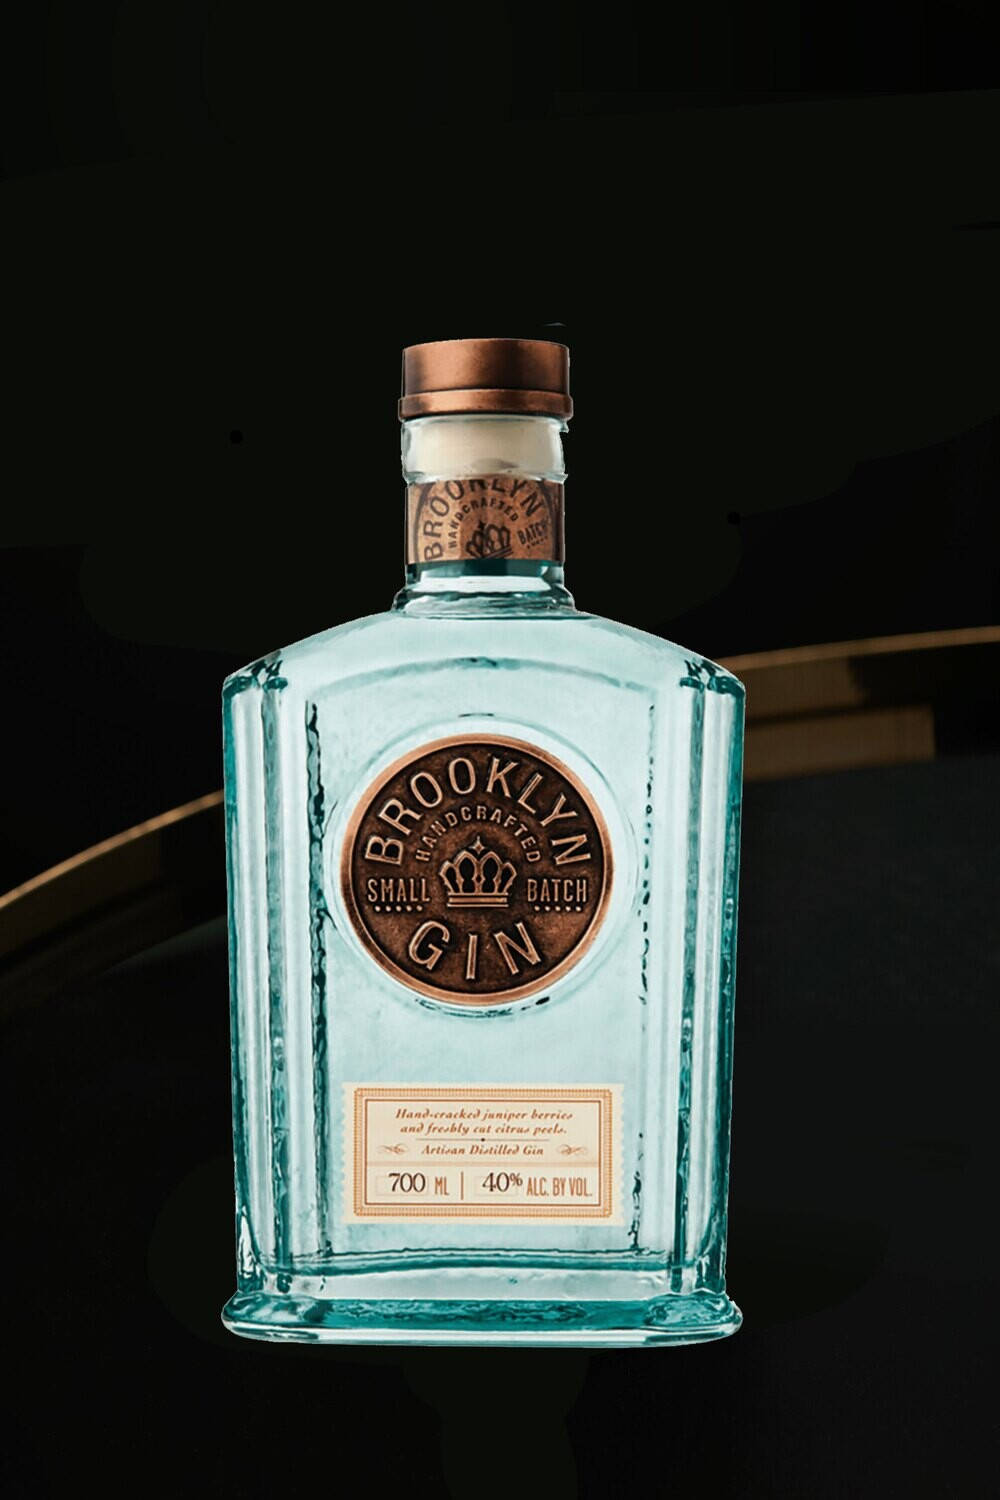 Brooklyngin Blue Bottle (swedish Translation In Context Of Computer Or Mobile Wallpaper): Brooklyn Gin Blue Bottle Wallpaper